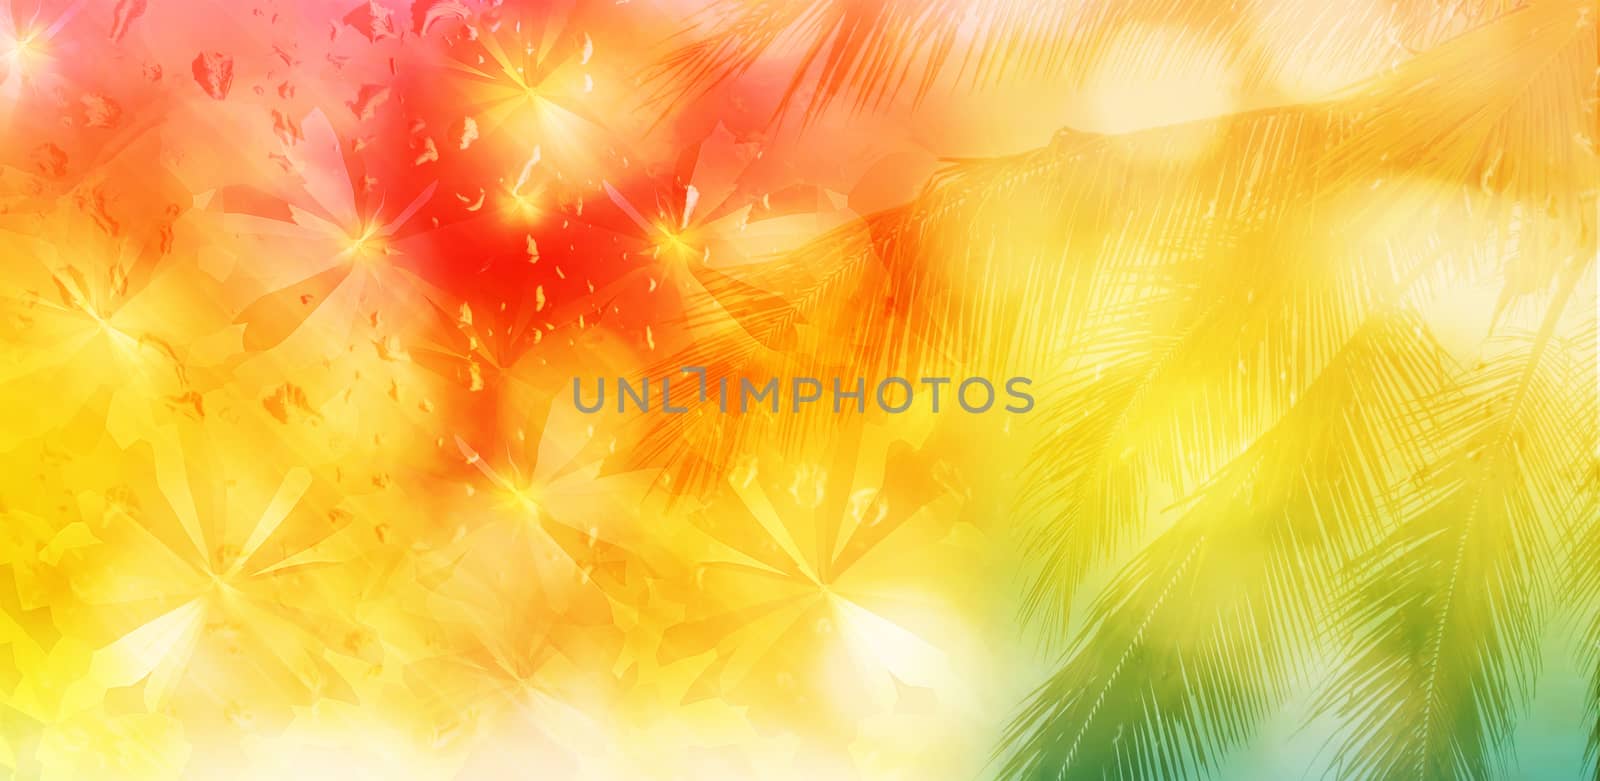 Blurred background of coconut tree and abstract butterfly on water drop pink orange yellow and green for summer background